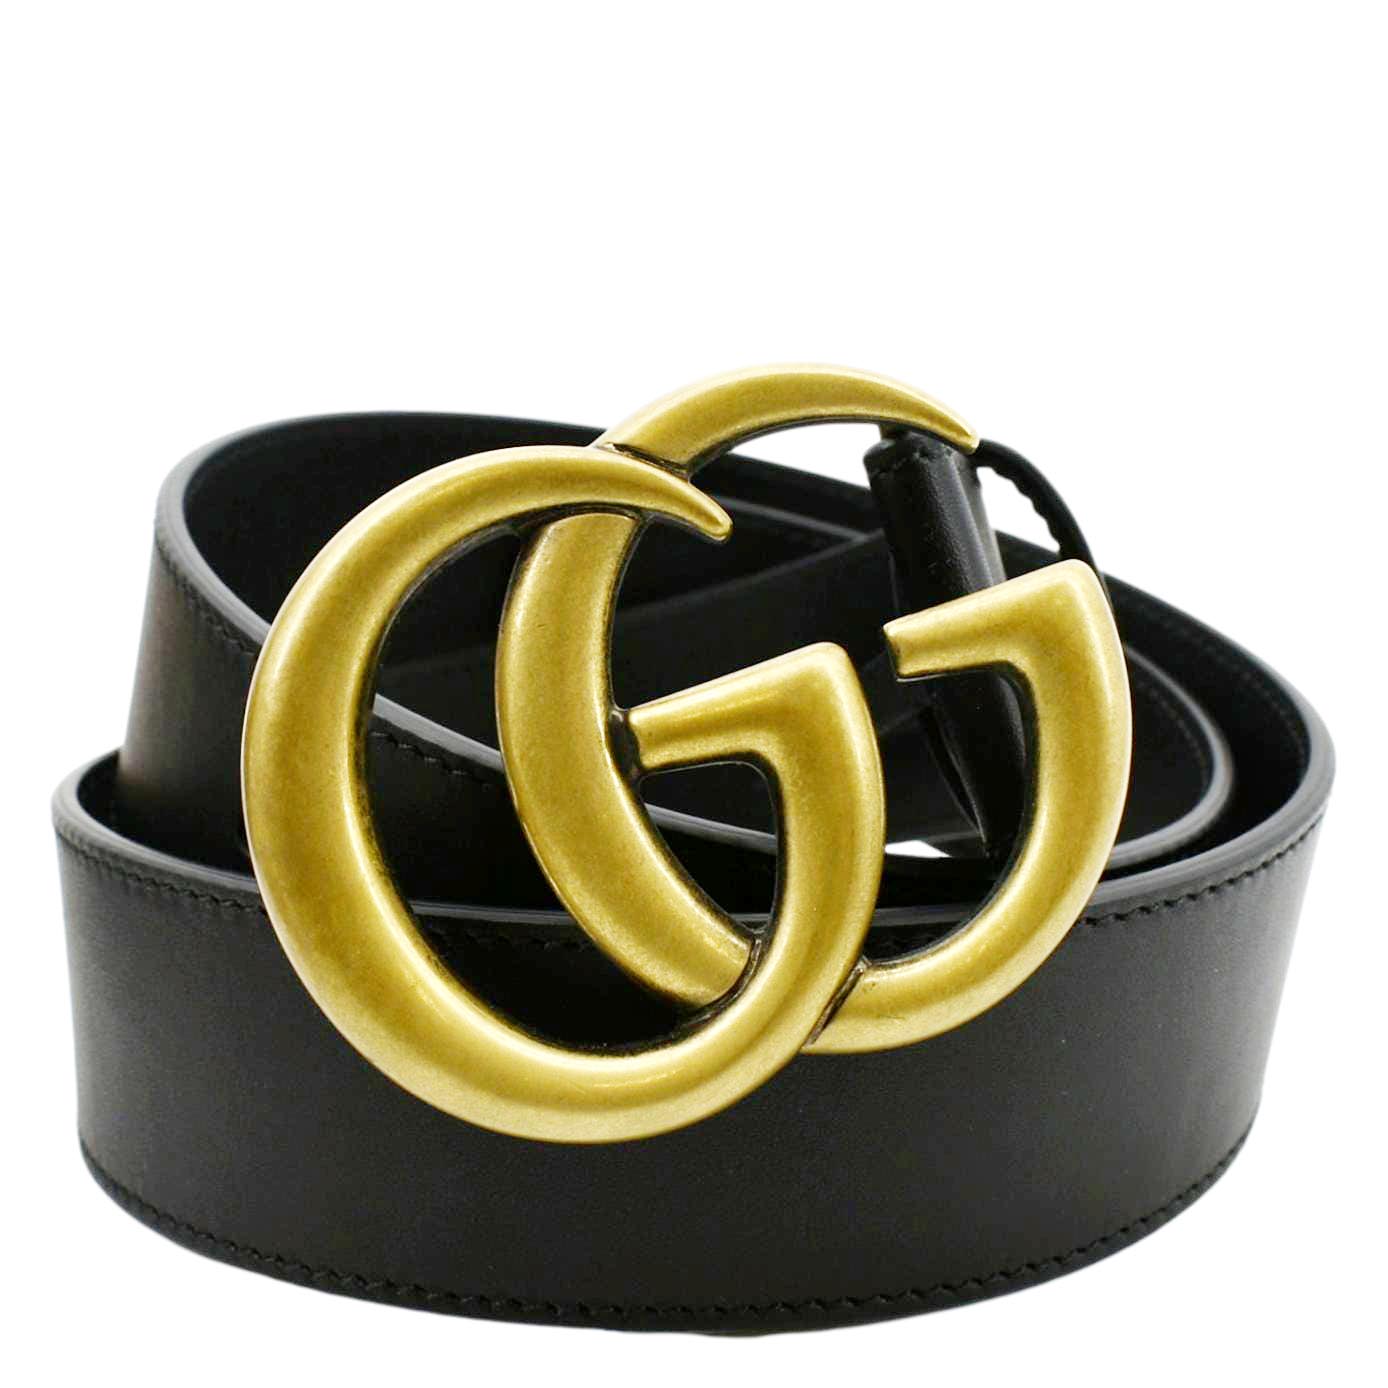 GUCCI Double G Buckle Leather Belt Size 80.32 Black 400593, gucci